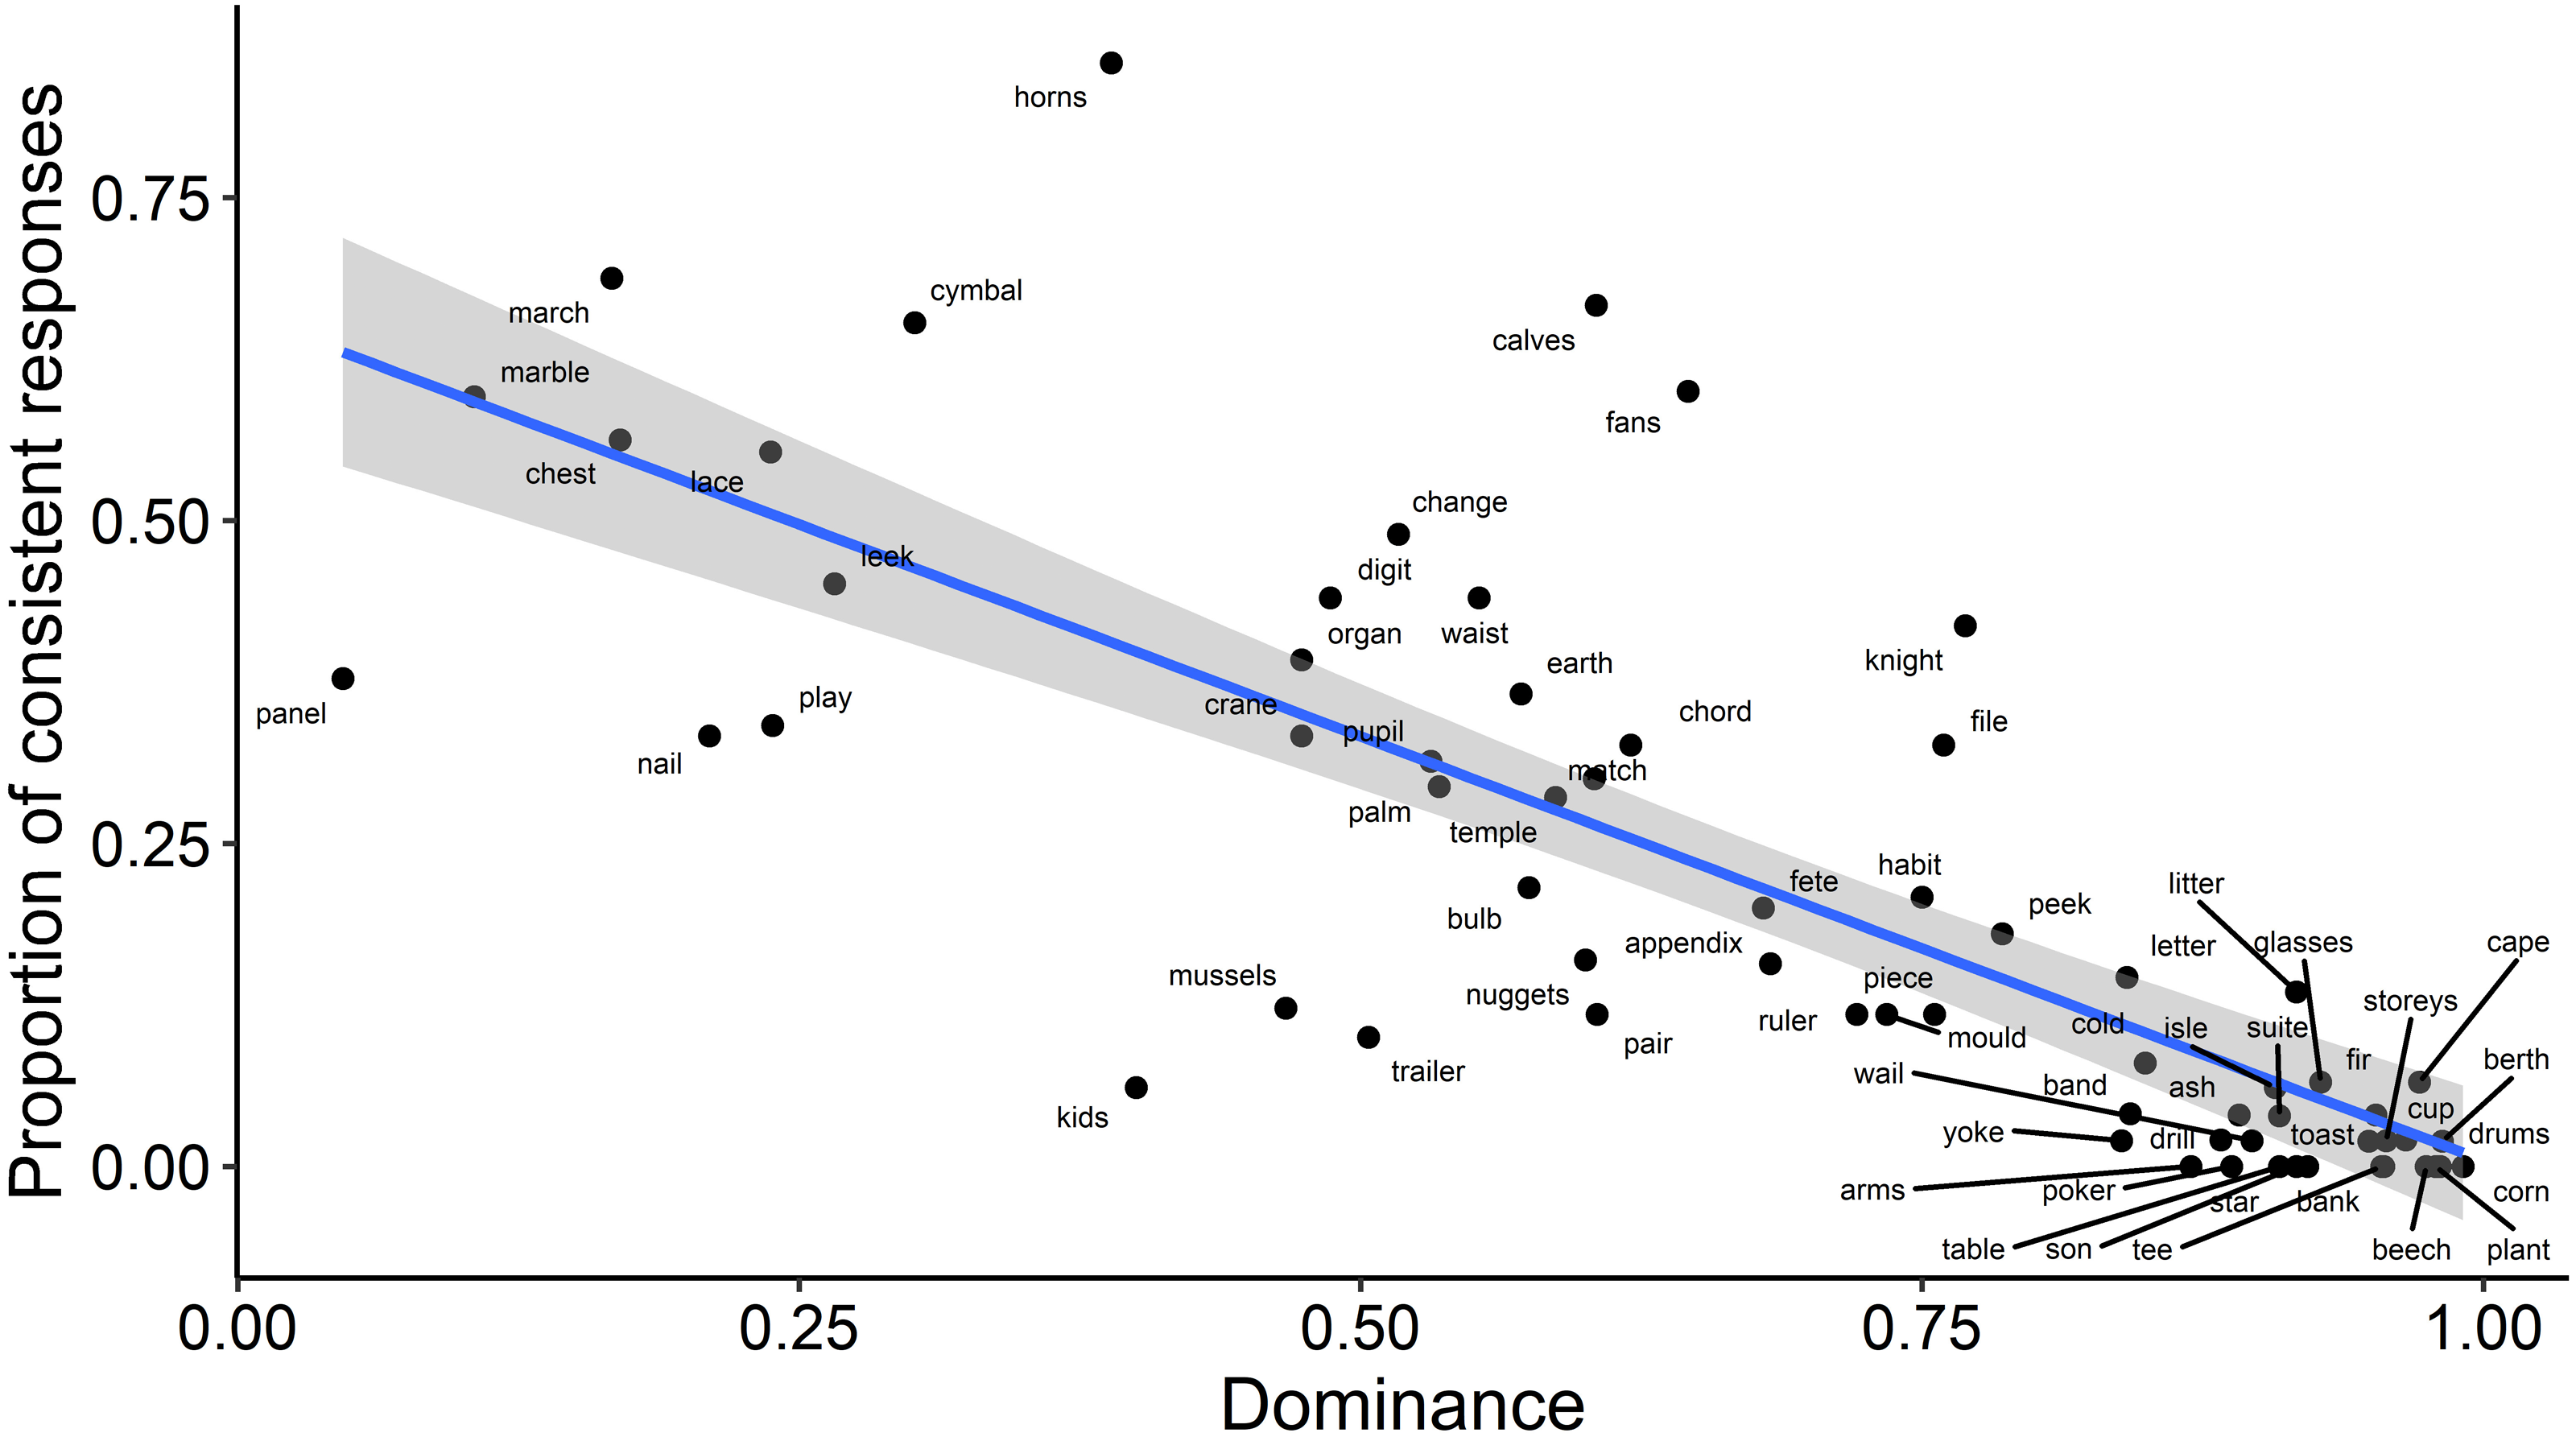 Words Career and Linger are semantically related or have opposite